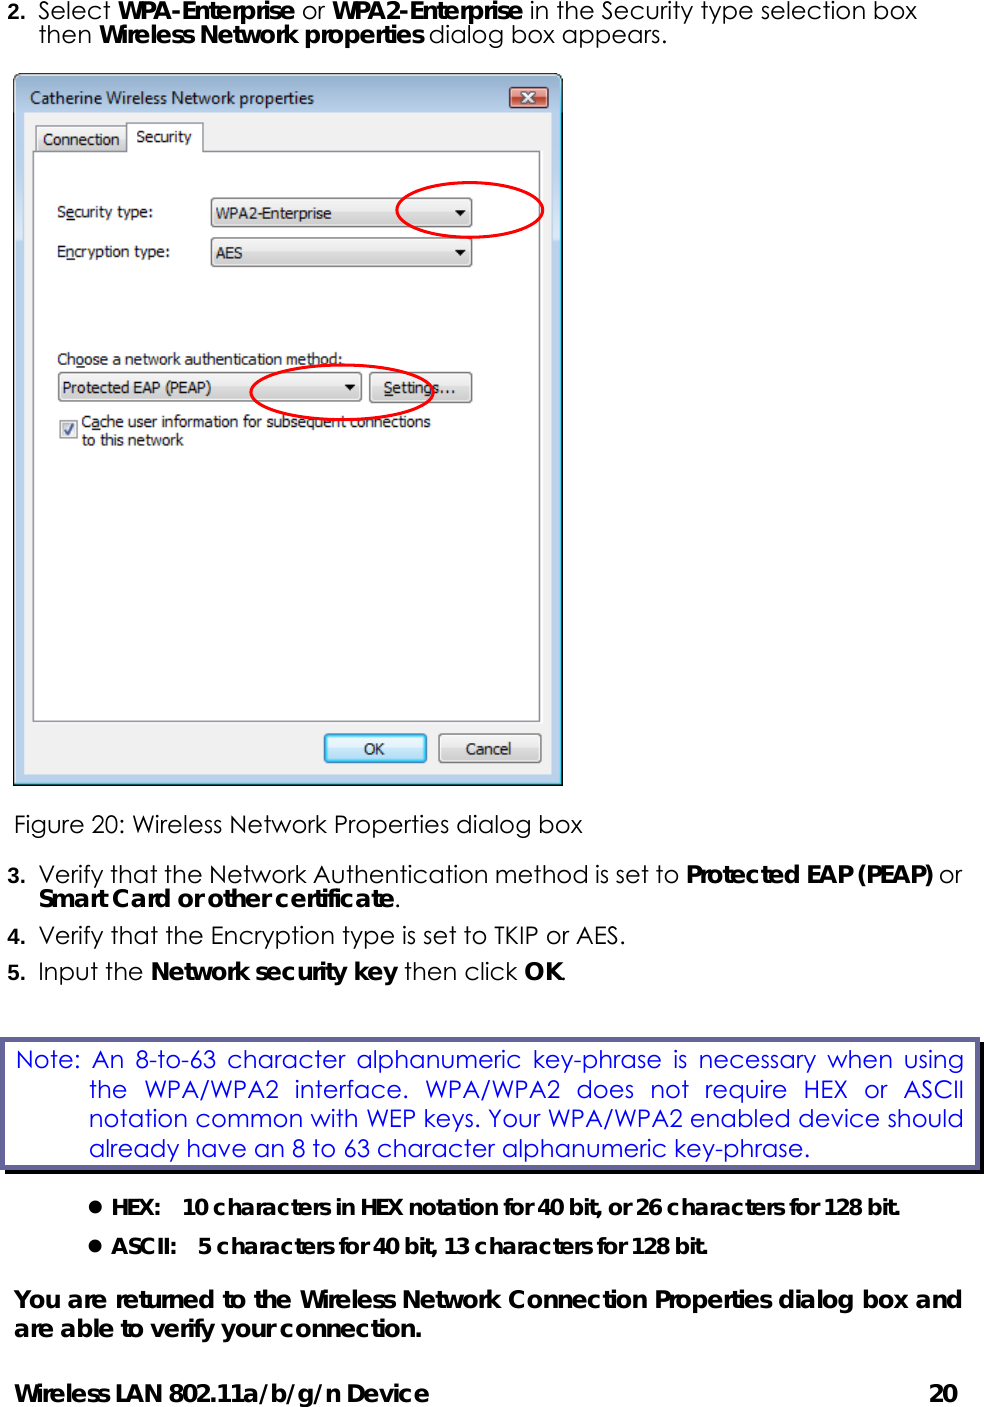 Wireless LAN 802.11a/b/g/n Device                                         20 2.  Select WPA-Enterprise or WPA2-Enterprise in the Security type selection box then Wireless Network properties dialog box appears.    Figure 20: Wireless Network Properties dialog box 3.  Verify that the Network Authentication method is set to Protected EAP (PEAP) or Smart Card or other certificate. 4.  Verify that the Encryption type is set to TKIP or AES. 5.  Input the Network security key then click OK. z HEX:    10 characters in HEX notation for 40 bit, or 26 characters for 128 bit. z ASCII:    5 characters for 40 bit, 13 characters for 128 bit. You are returned to the Wireless Network Connection Properties dialog box and are able to verify your connection.   Note: An 8-to-63 character alphanumeric key-phrase is necessary when using the WPA/WPA2 interface. WPA/WPA2 does not require HEX or ASCII notation common with WEP keys. Your WPA/WPA2 enabled device should already have an 8 to 63 character alphanumeric key-phrase.   